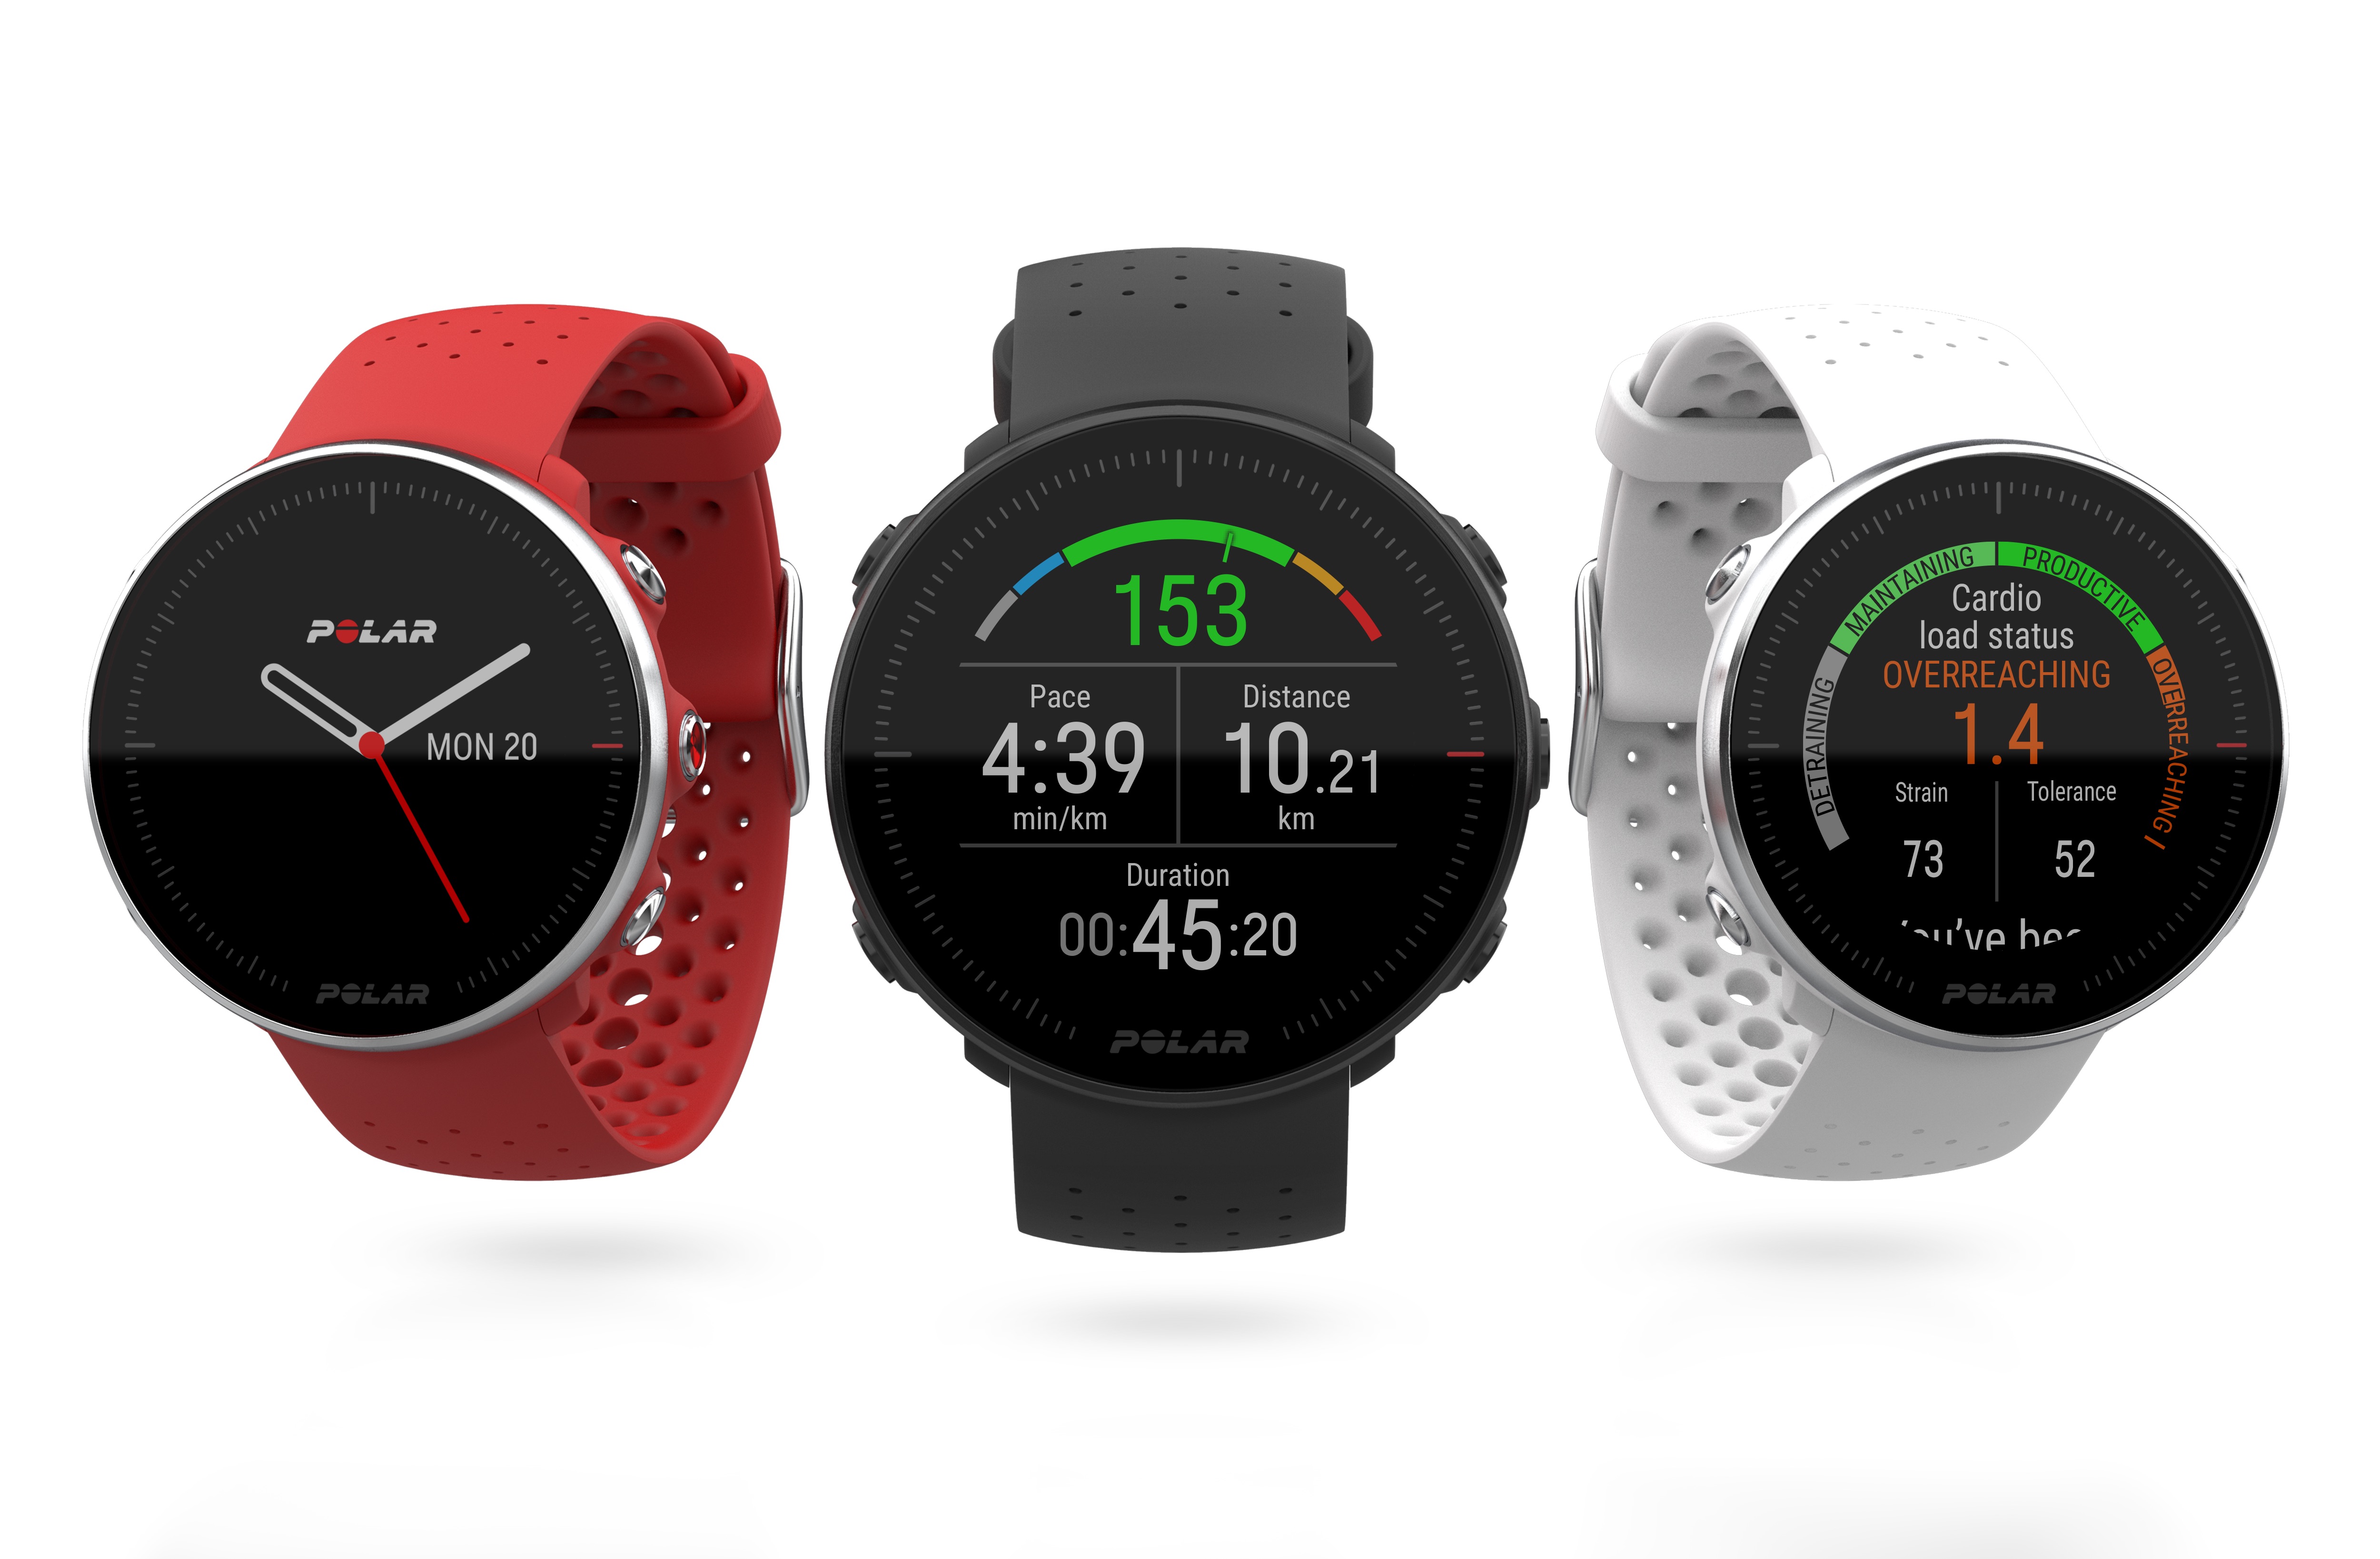 The Polar Vantage M and V Fitness Watches Offer More Training Features